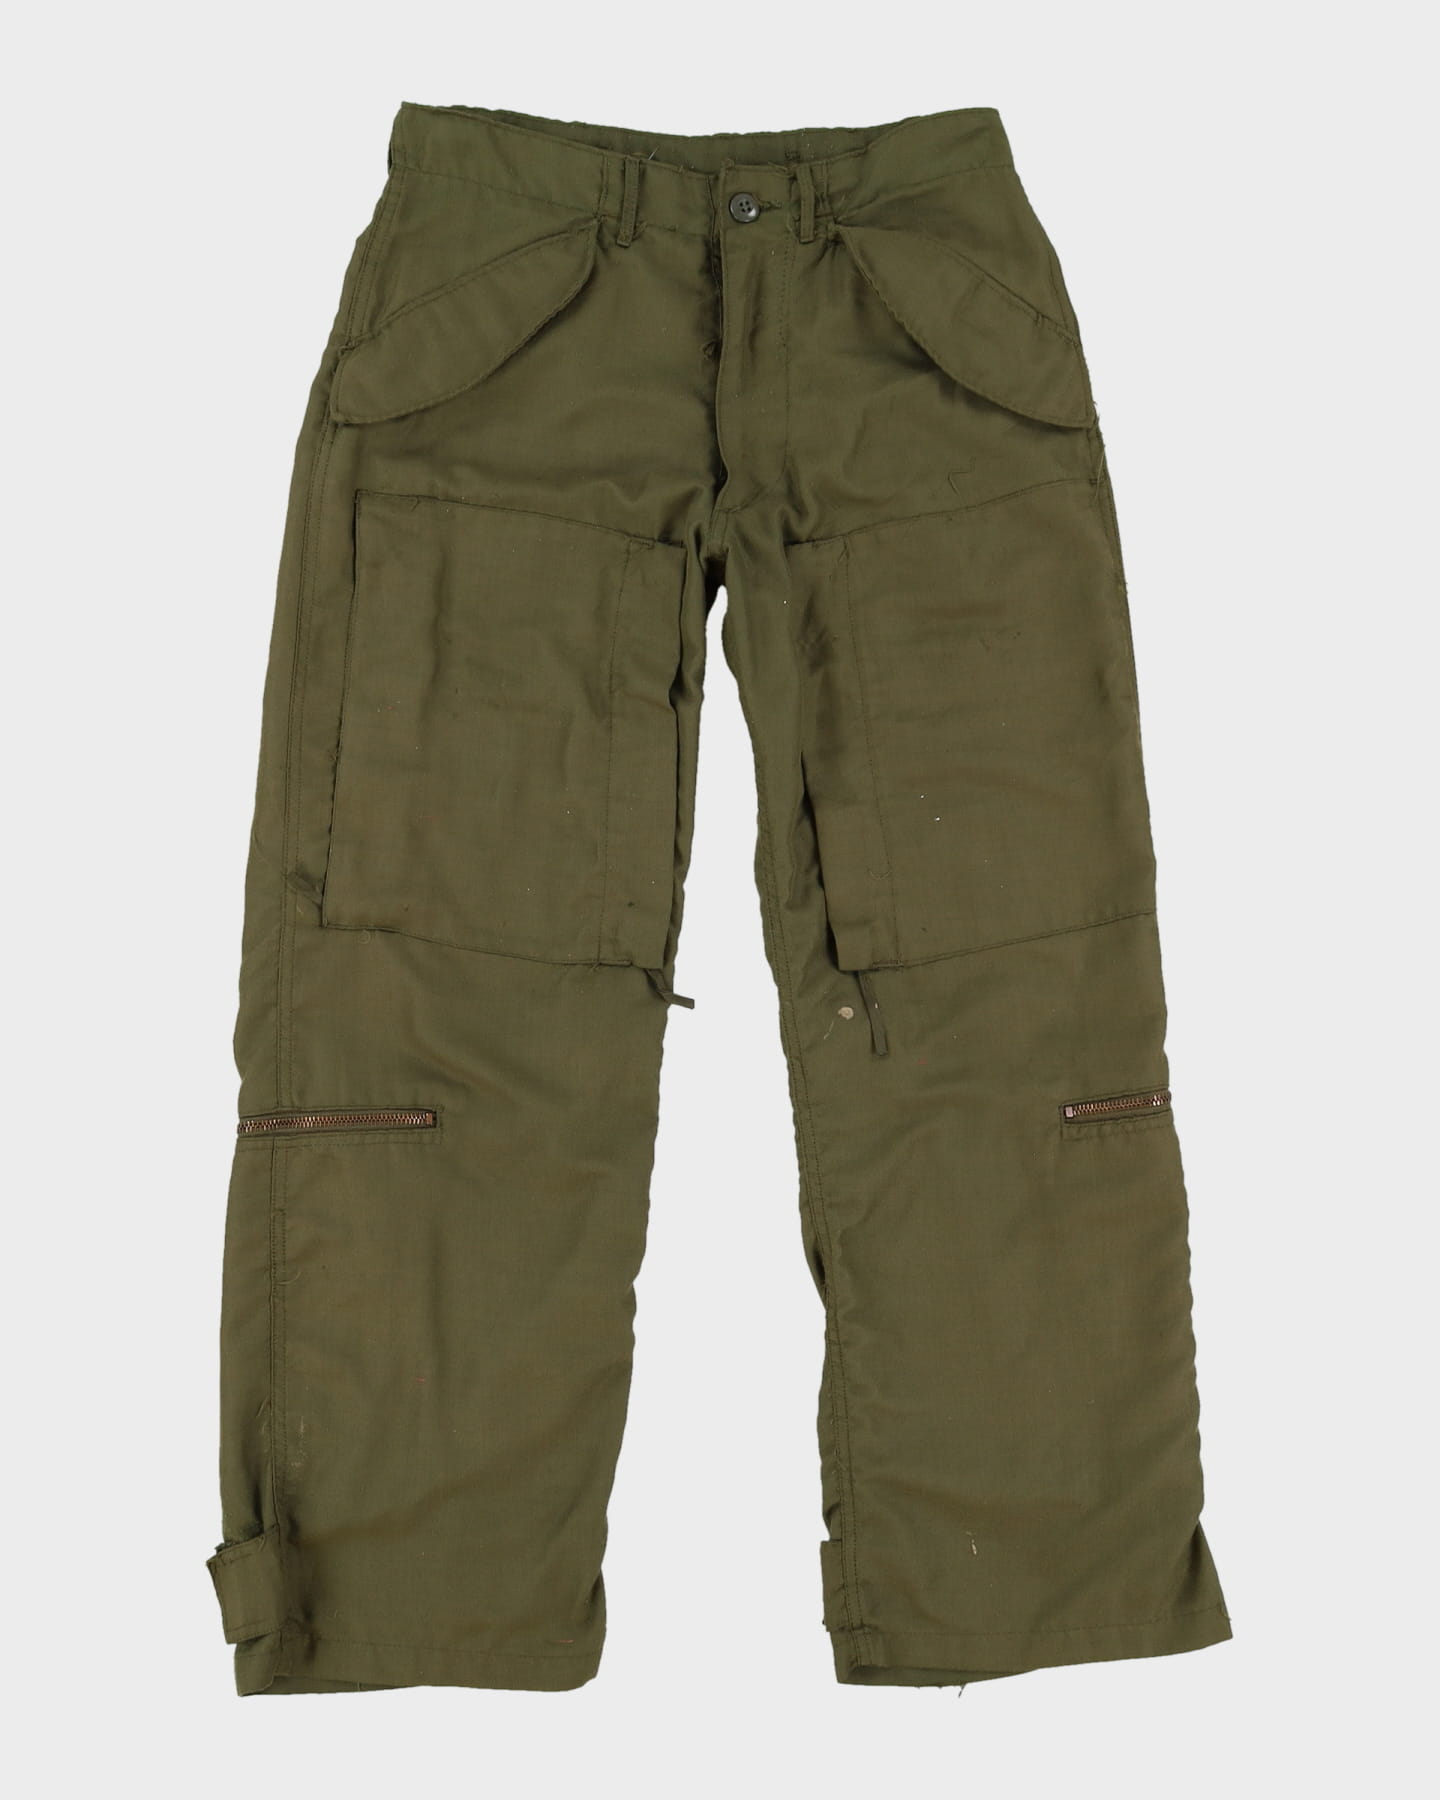 1971 Vietnam War Vintage US Army Helicopter Pilot Nomex Trousers - 30x ...